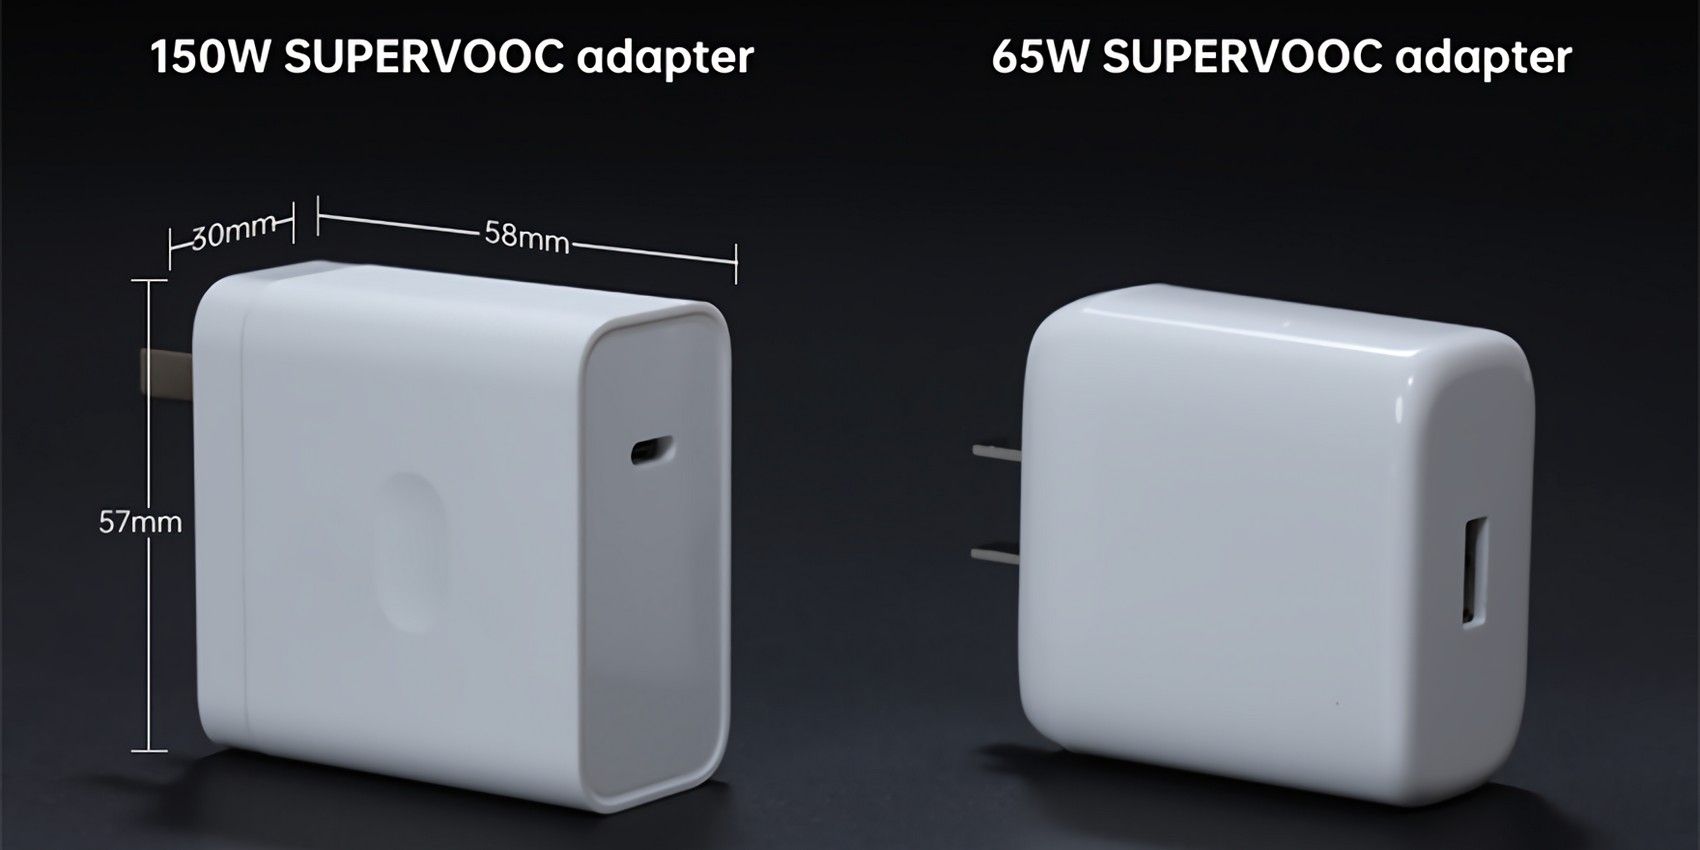 Oppo shows its 150W charger